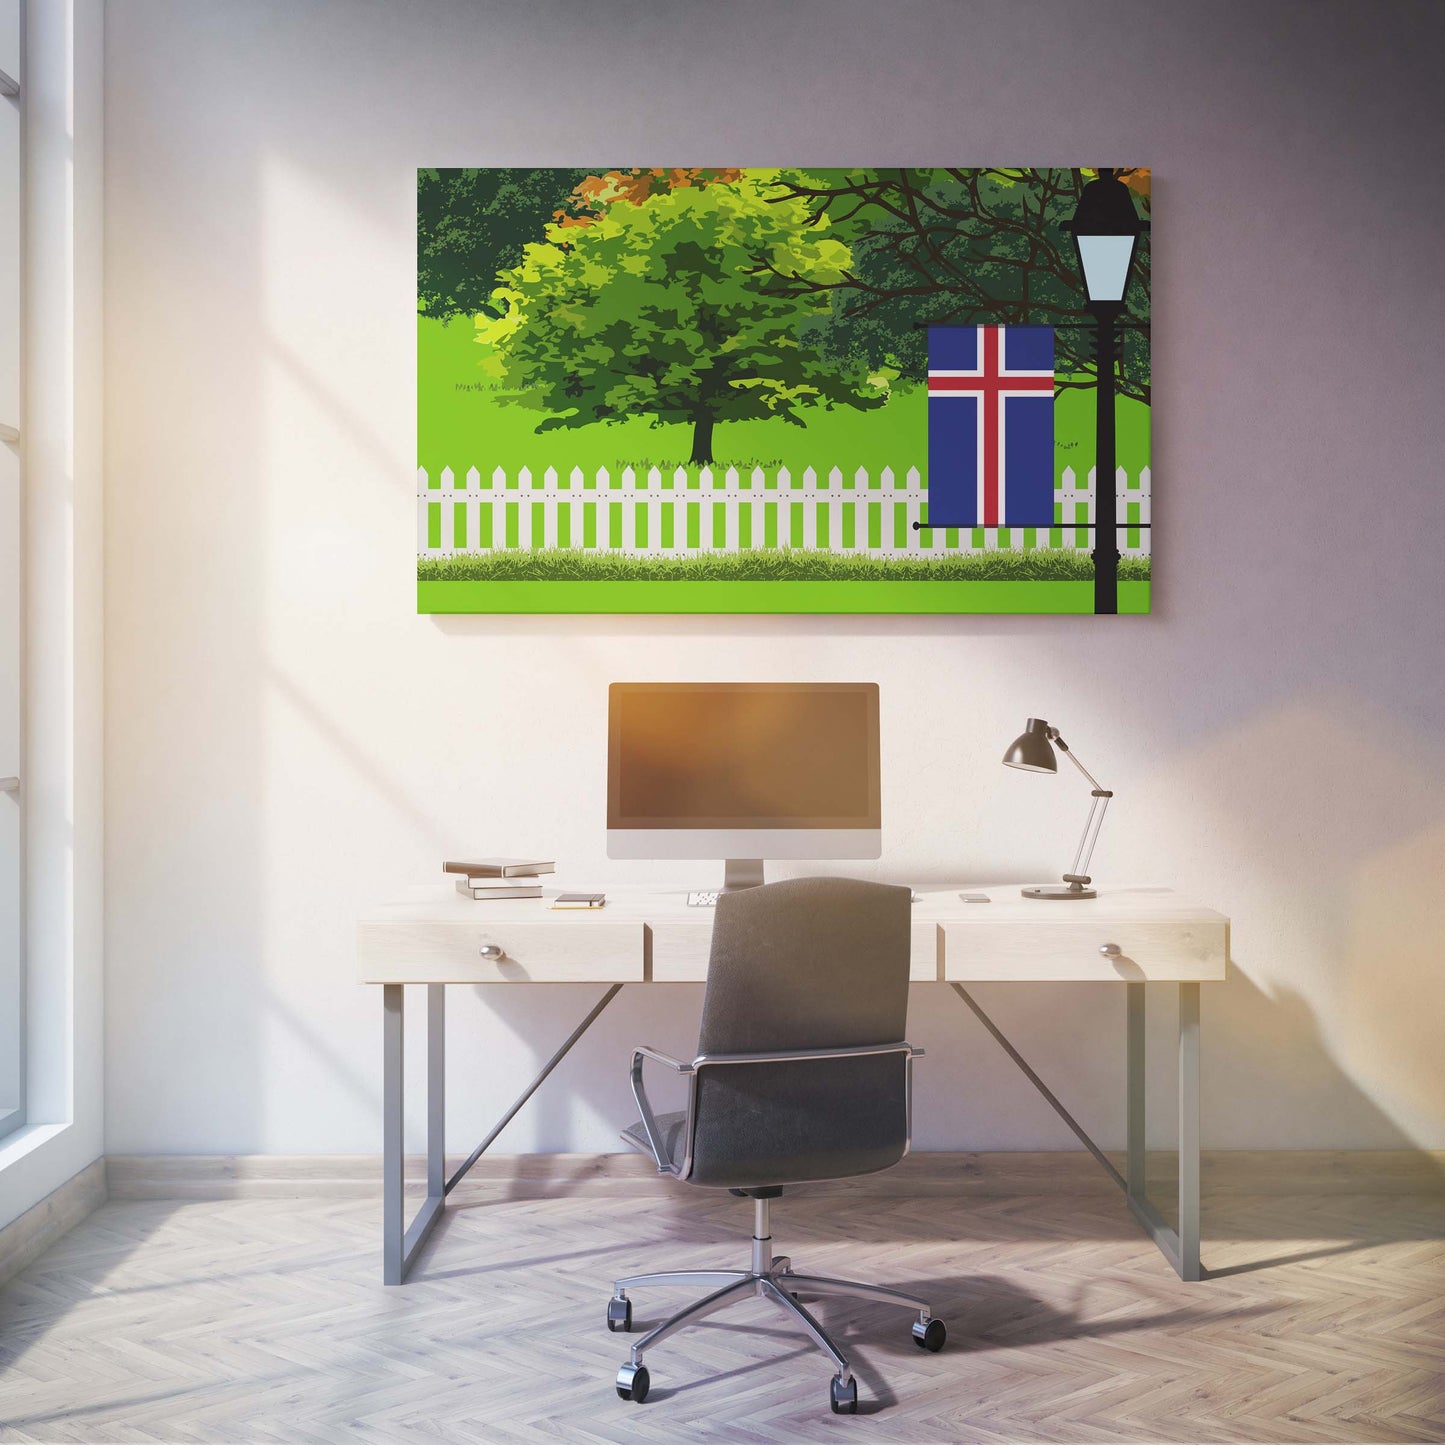 Iceland Flags Trees Street Lamp Canvas Print Framed